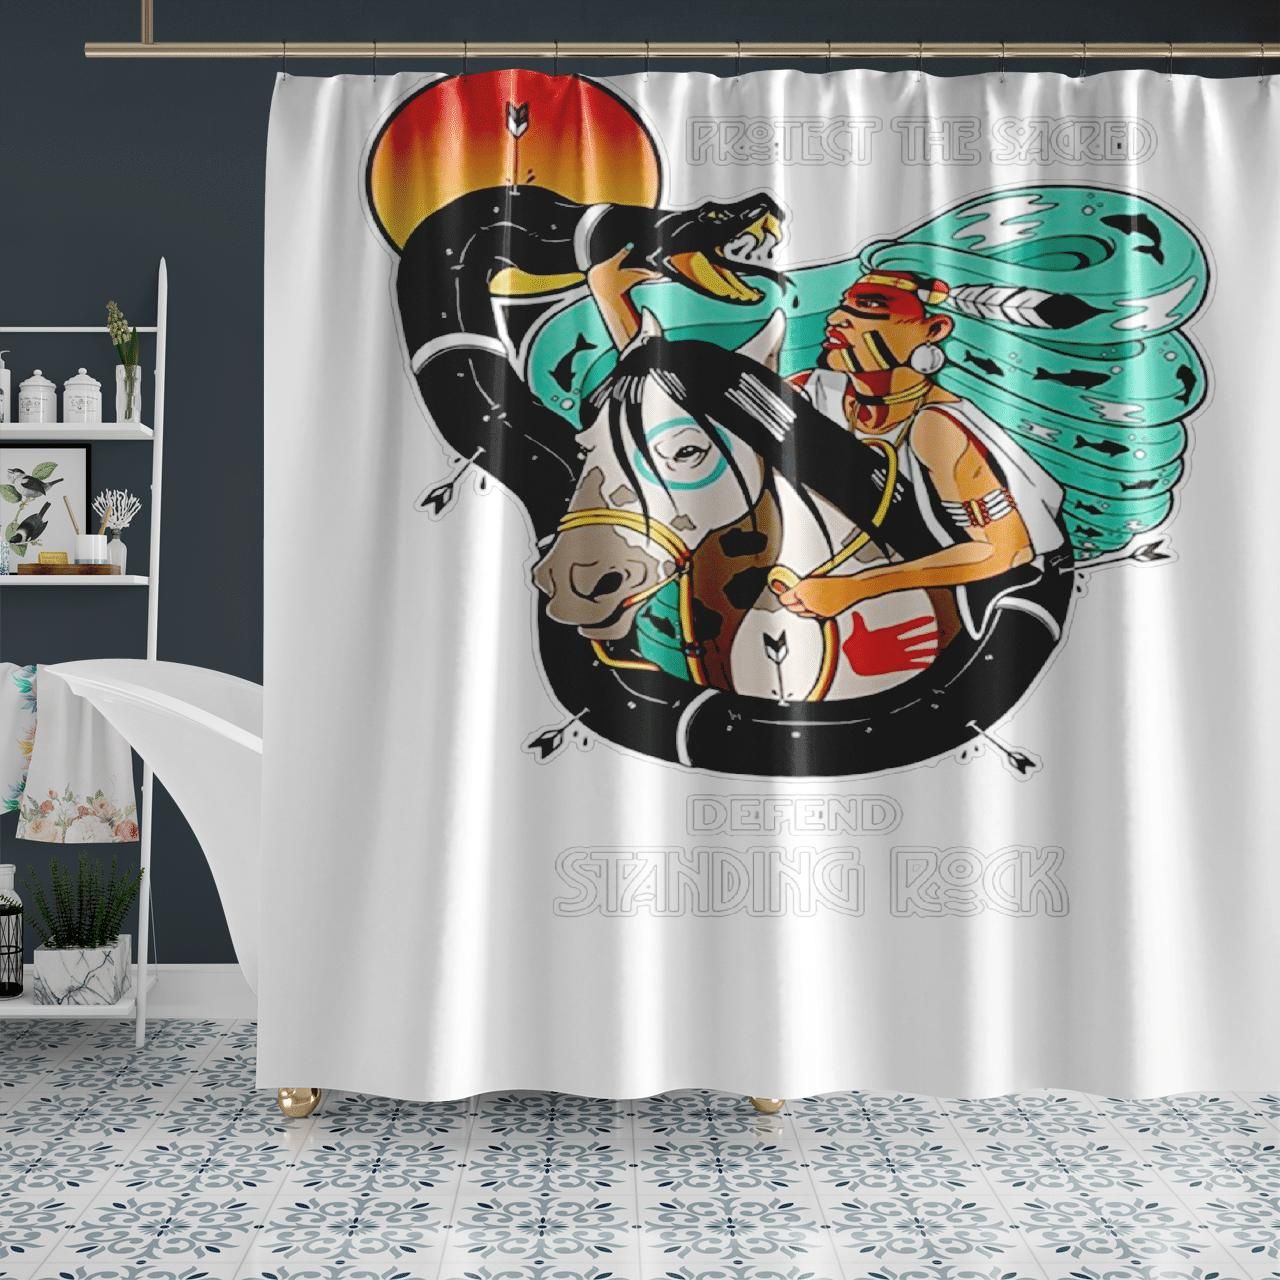 Protect The Sacred Defend Standing Rock Unique Design Shower Curtain